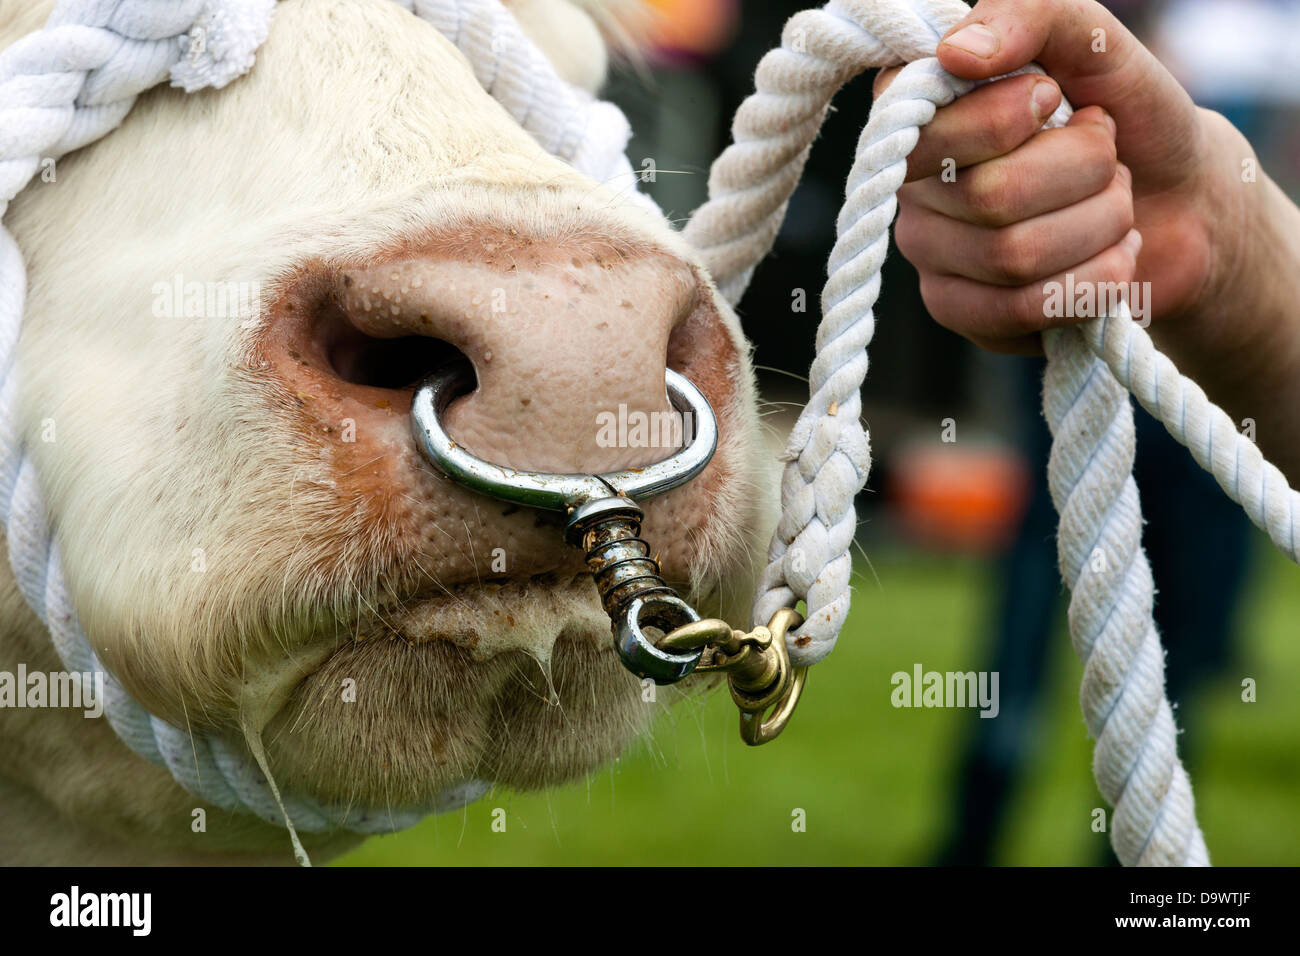 charolais-bull-being-lead-by-a-rope-and-a-nose-ring-scotland-uk-D9WTJF.jpg